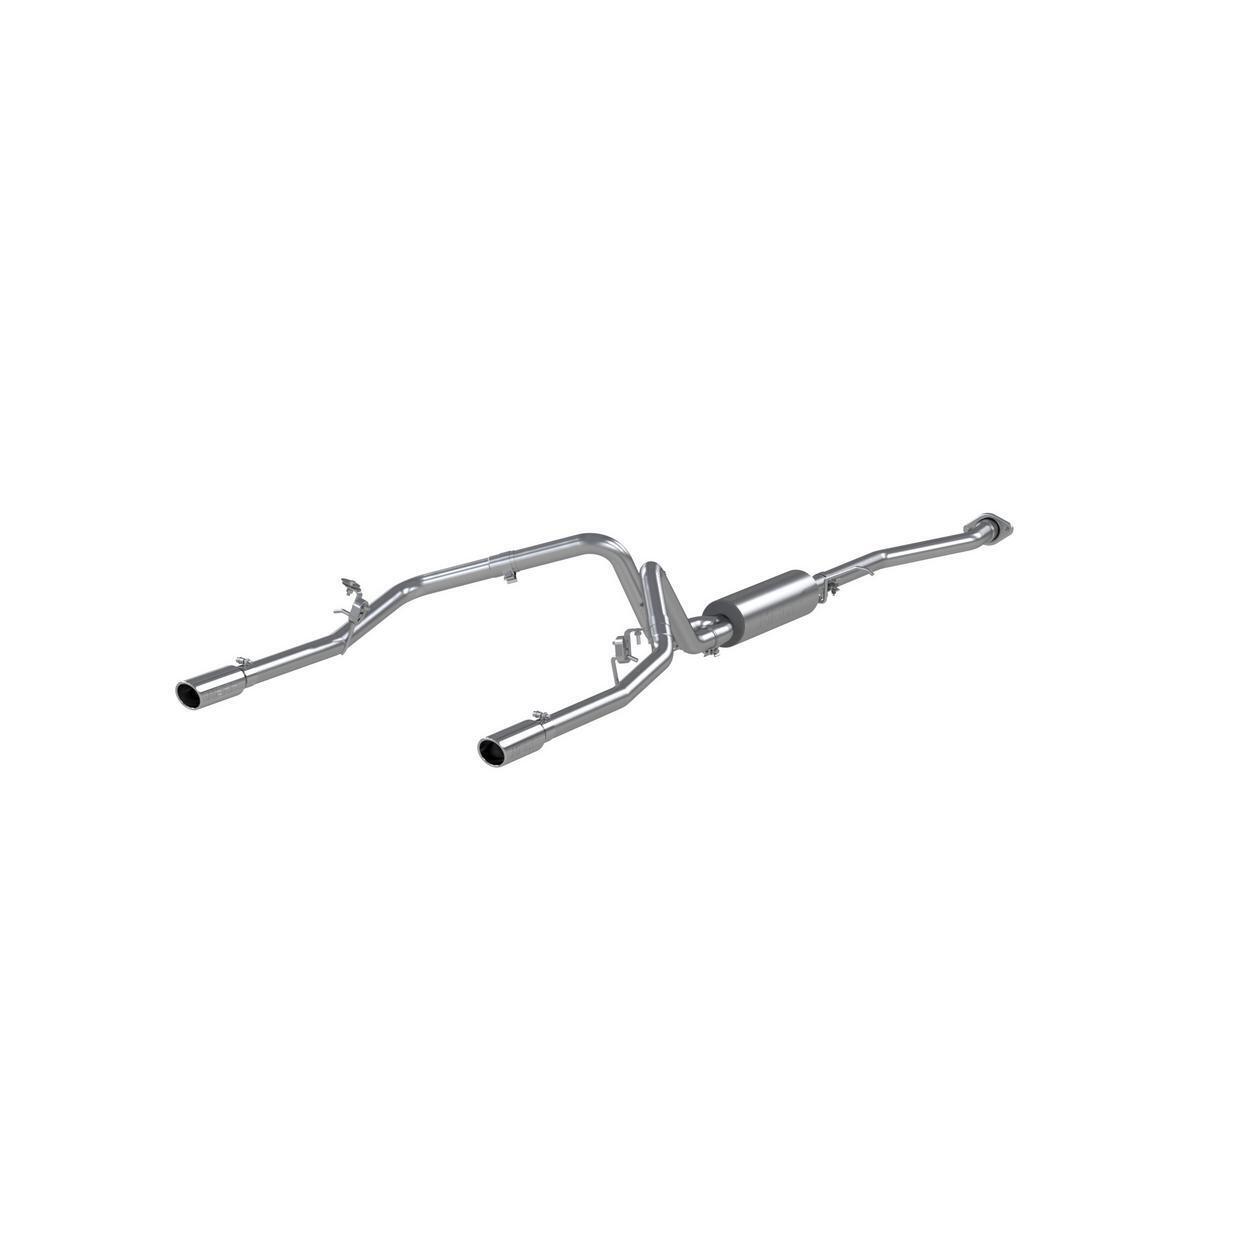 MBRP Exhaust S5016409-KZ Exhaust System Kit for 2007 Chevrolet Silverado 1500 Cl